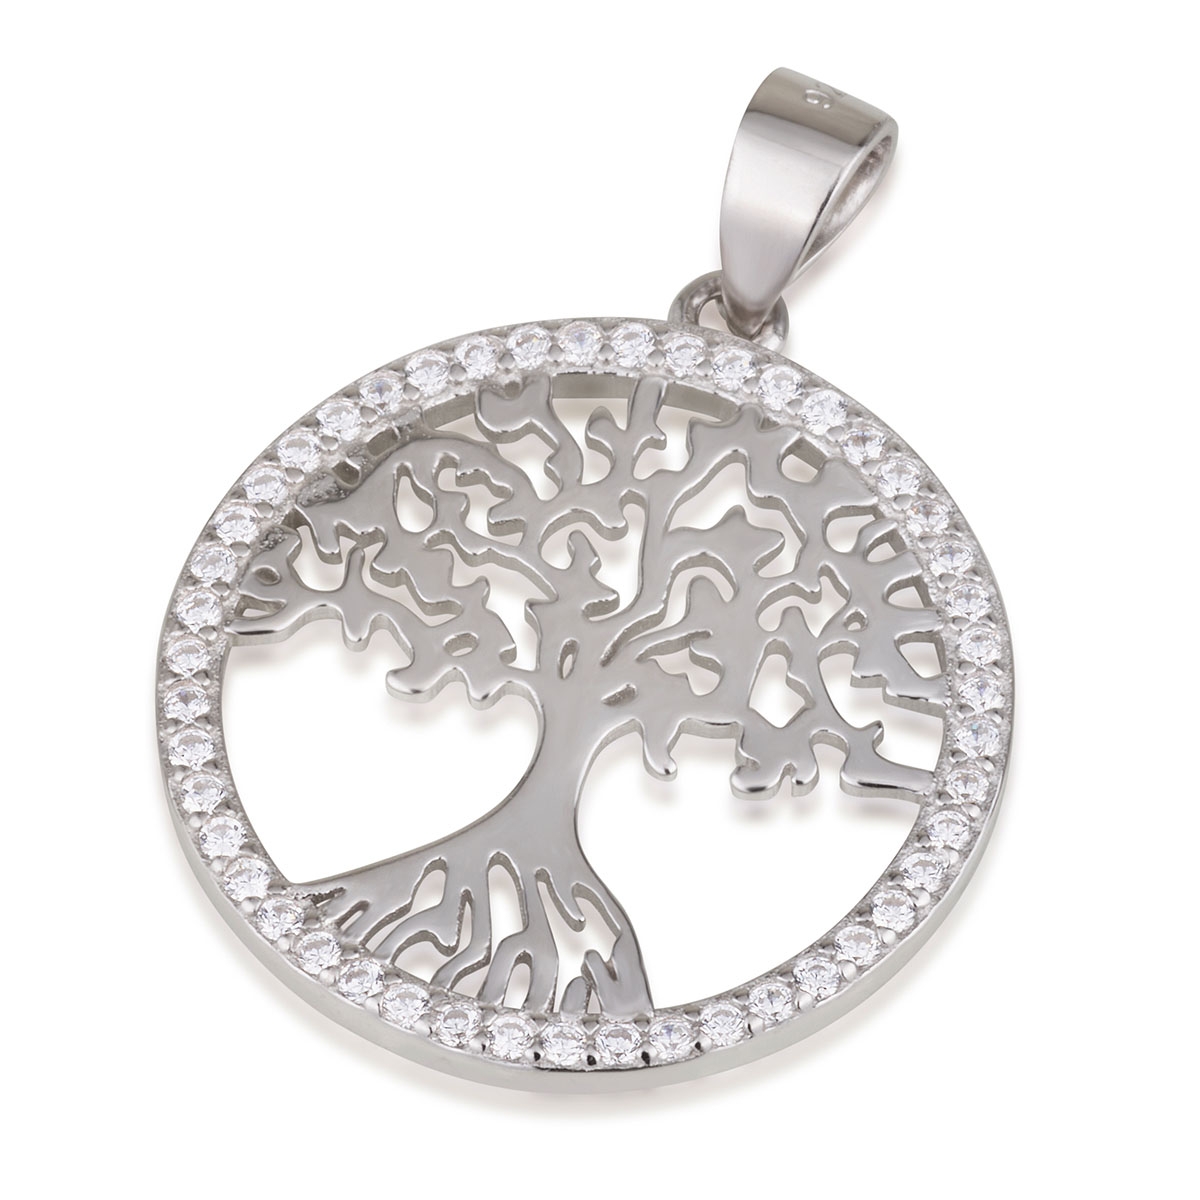 925 Sterling Silver and Rhodium-Plated Tree of Life Pendant With Zircon Stones - 1